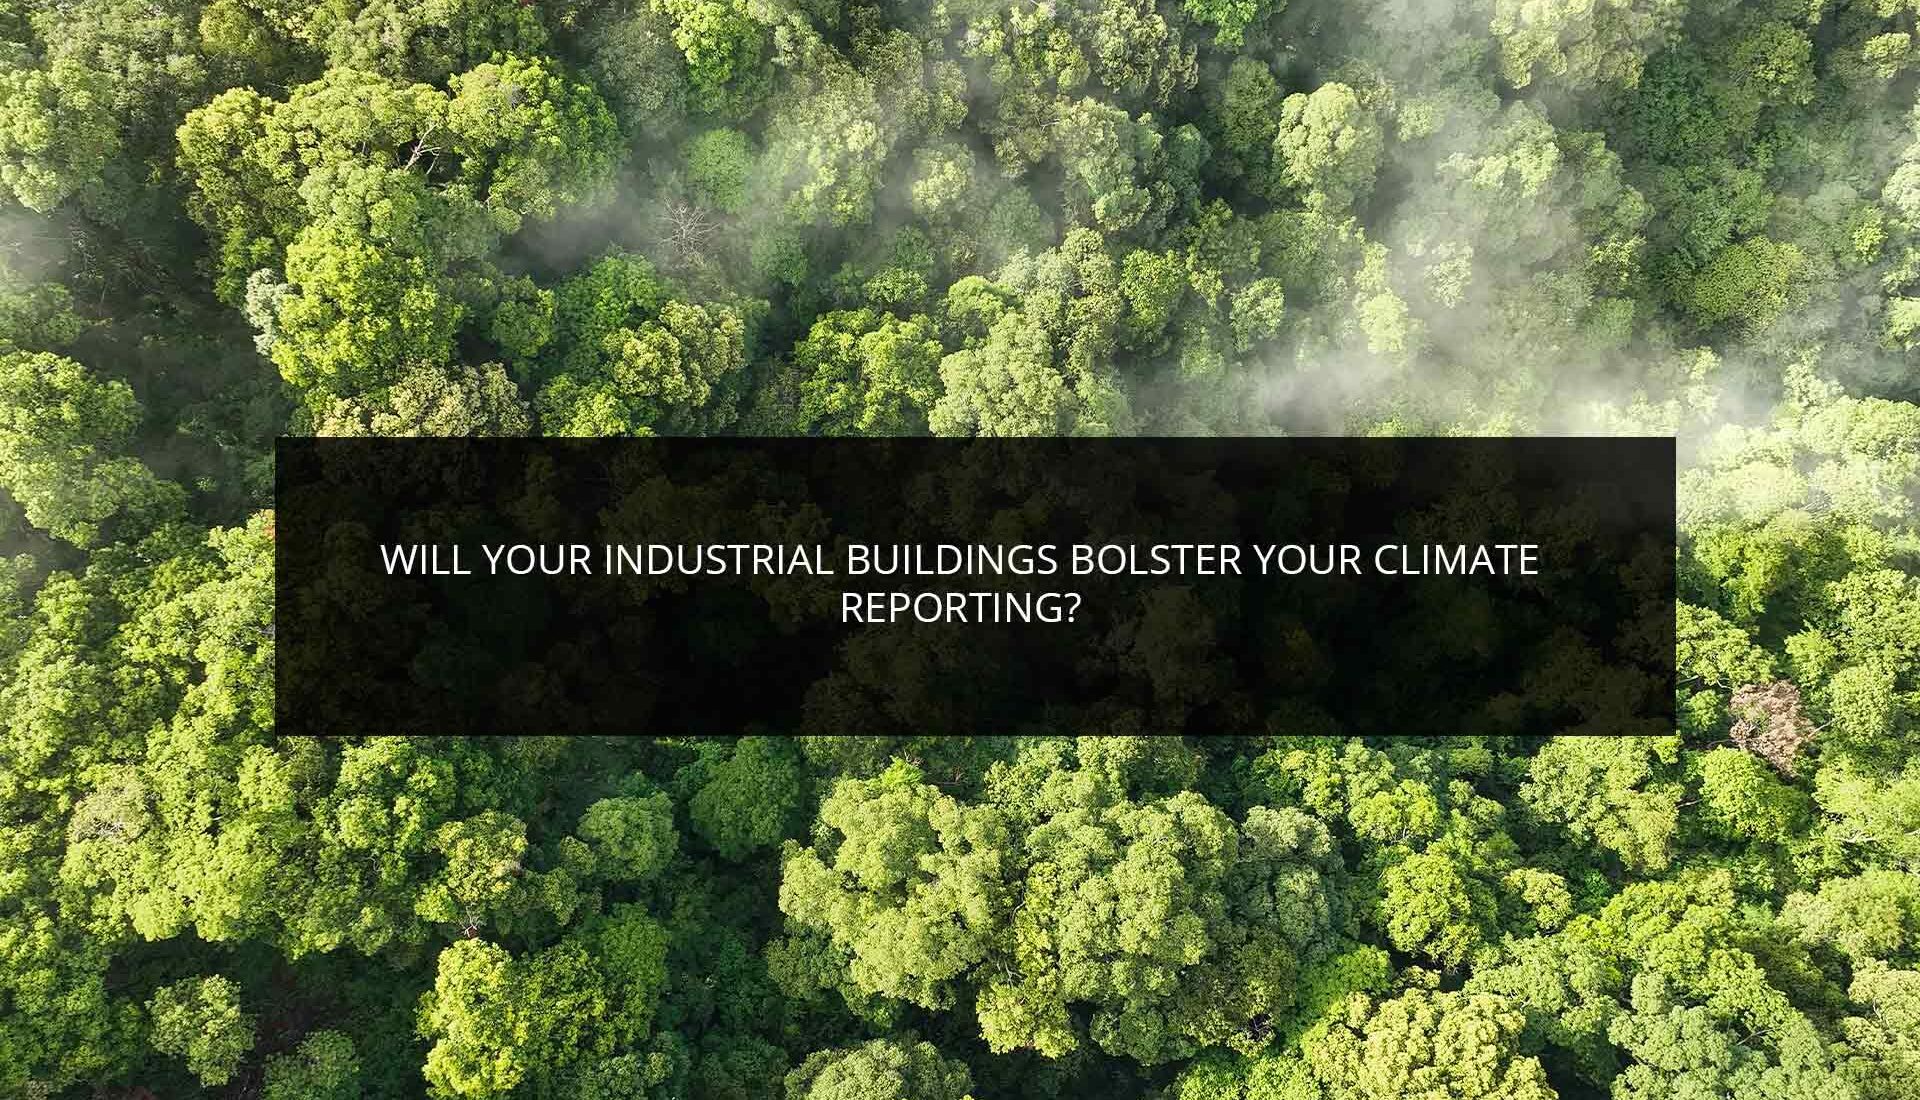 Will Your Industrial Buildings Bolster Your Climate Reporting?